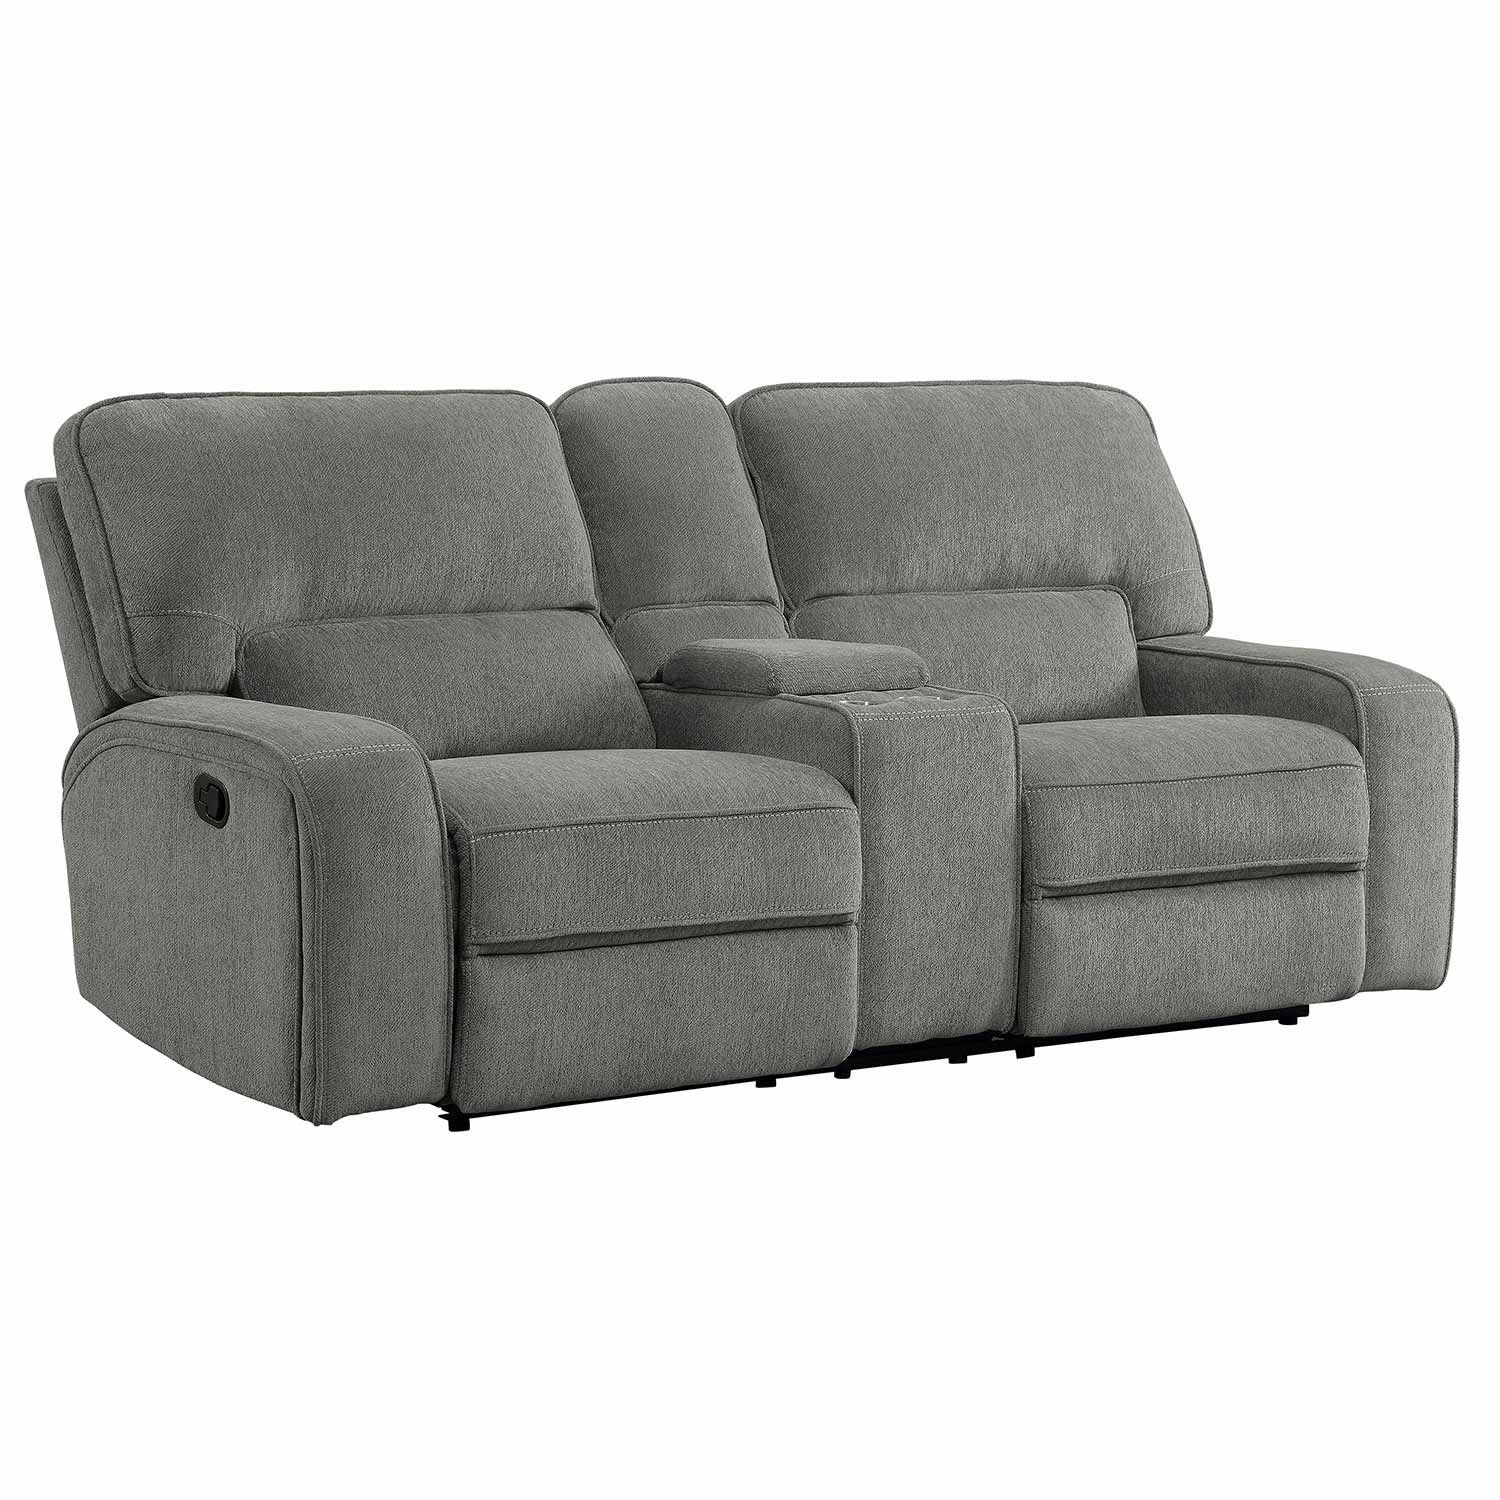 Homelegance Borneo Double Reclining Love Seat with Center Console - Mocha